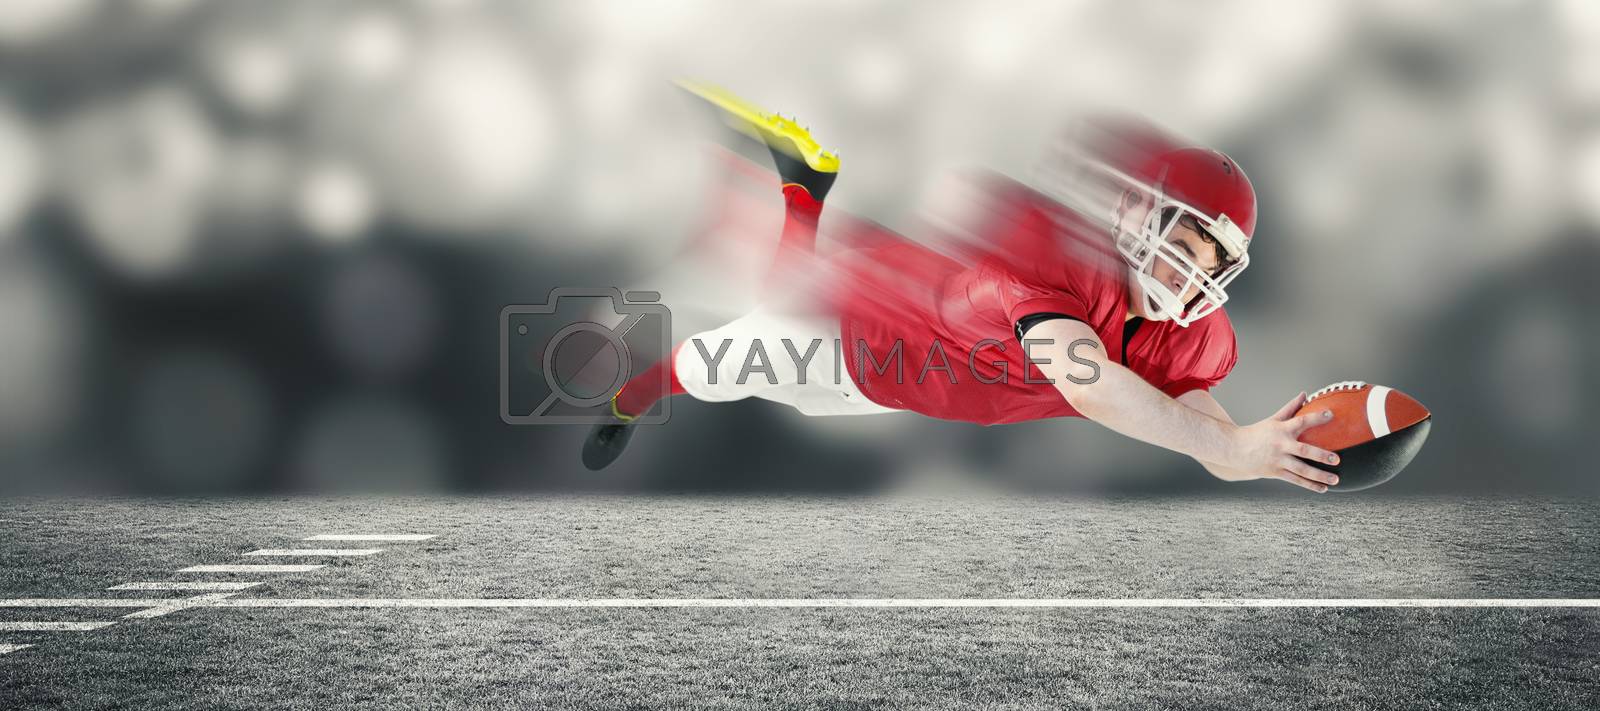 Royalty free image of Composite image of american football player scoring a touchdown by Wavebreakmedia